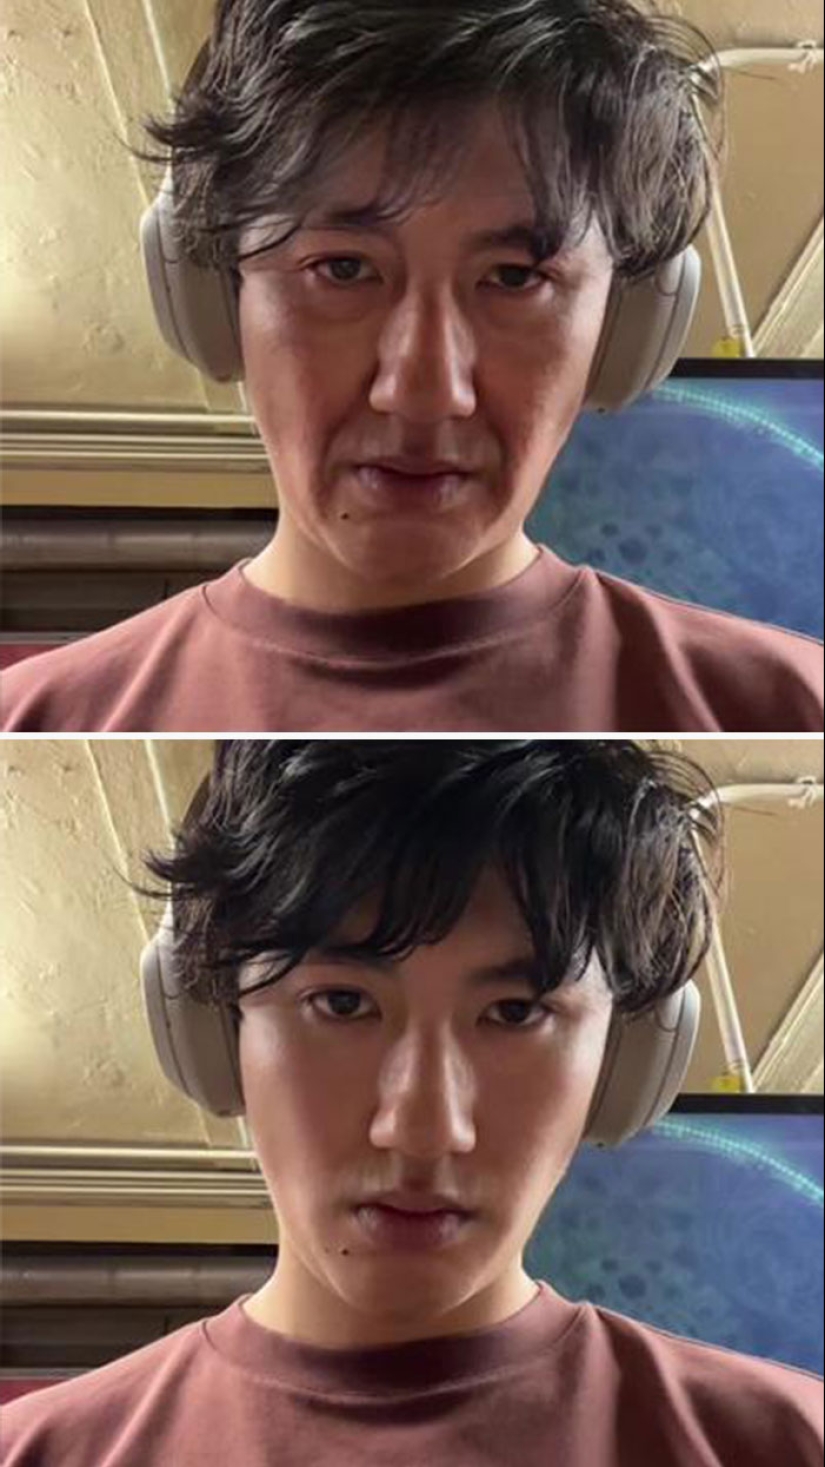 This TikTok Filter Allows People To See What They Would Look Like “Aged”, And Here Are 20 Of The Best Examples